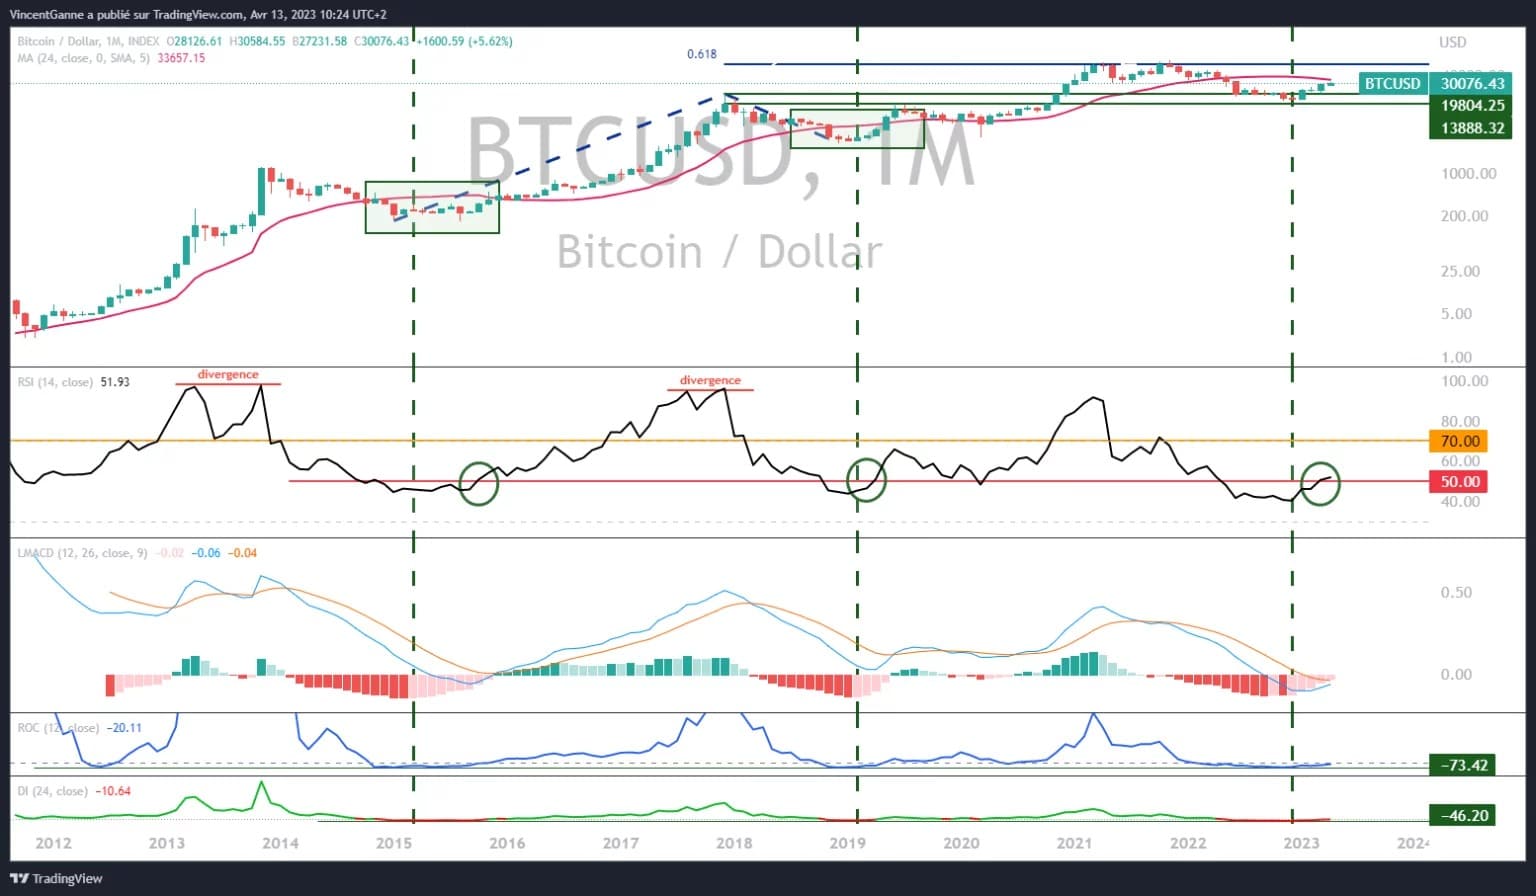 Chart that reveals Japanese candlesticks in monthly bitcoin price data